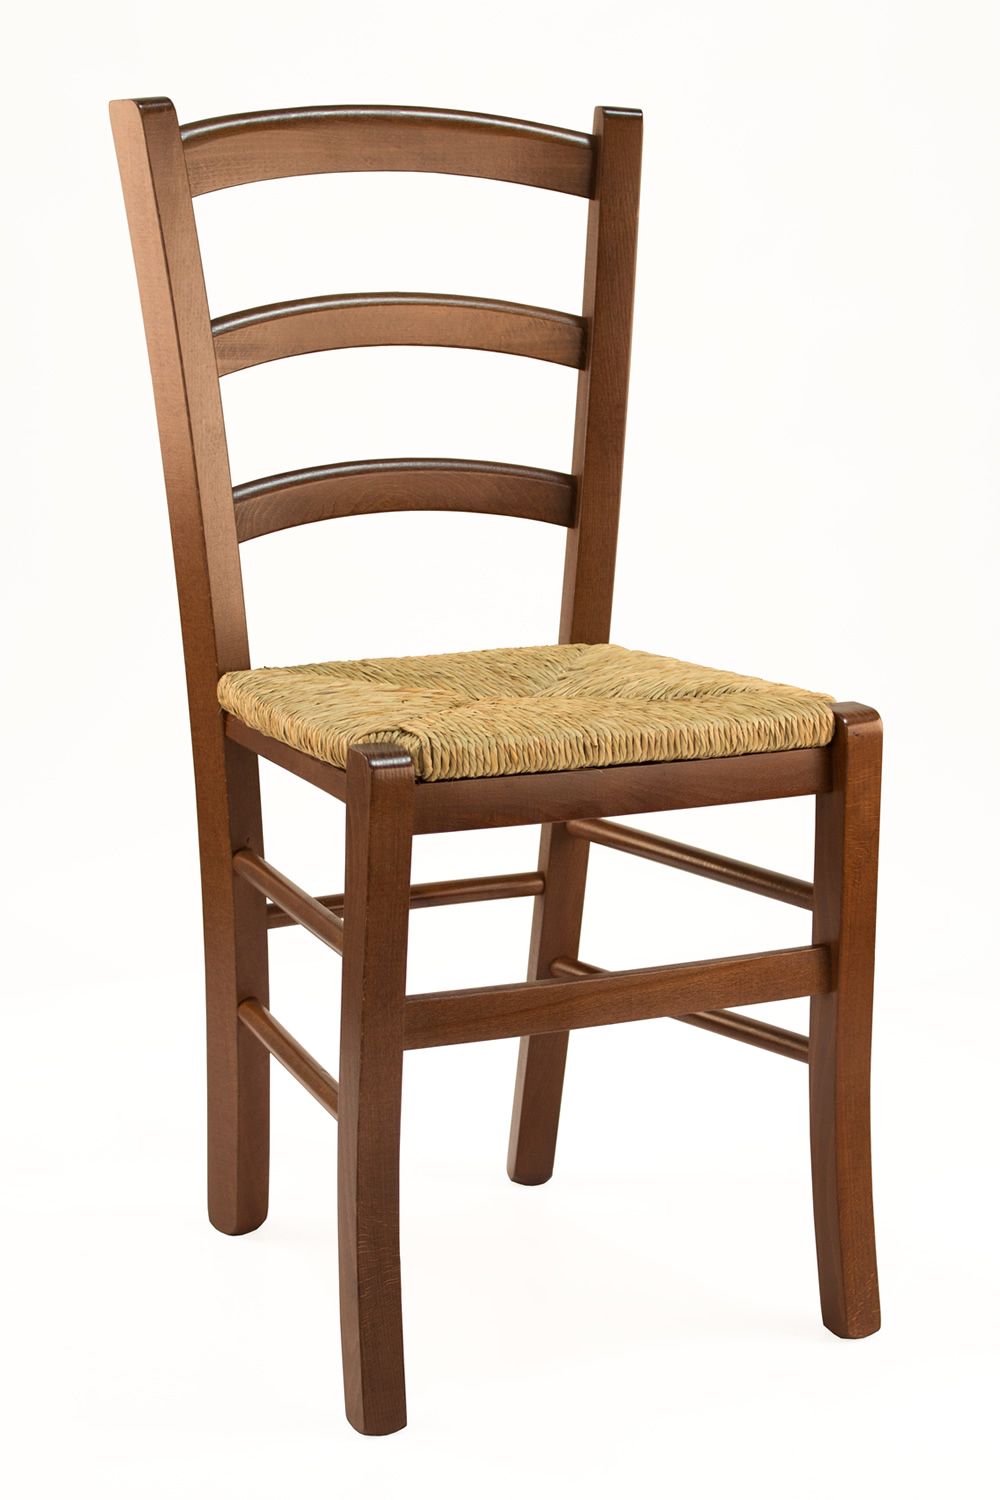 110 for Bars and Restaurants - Wooden chair for bar and restaurant